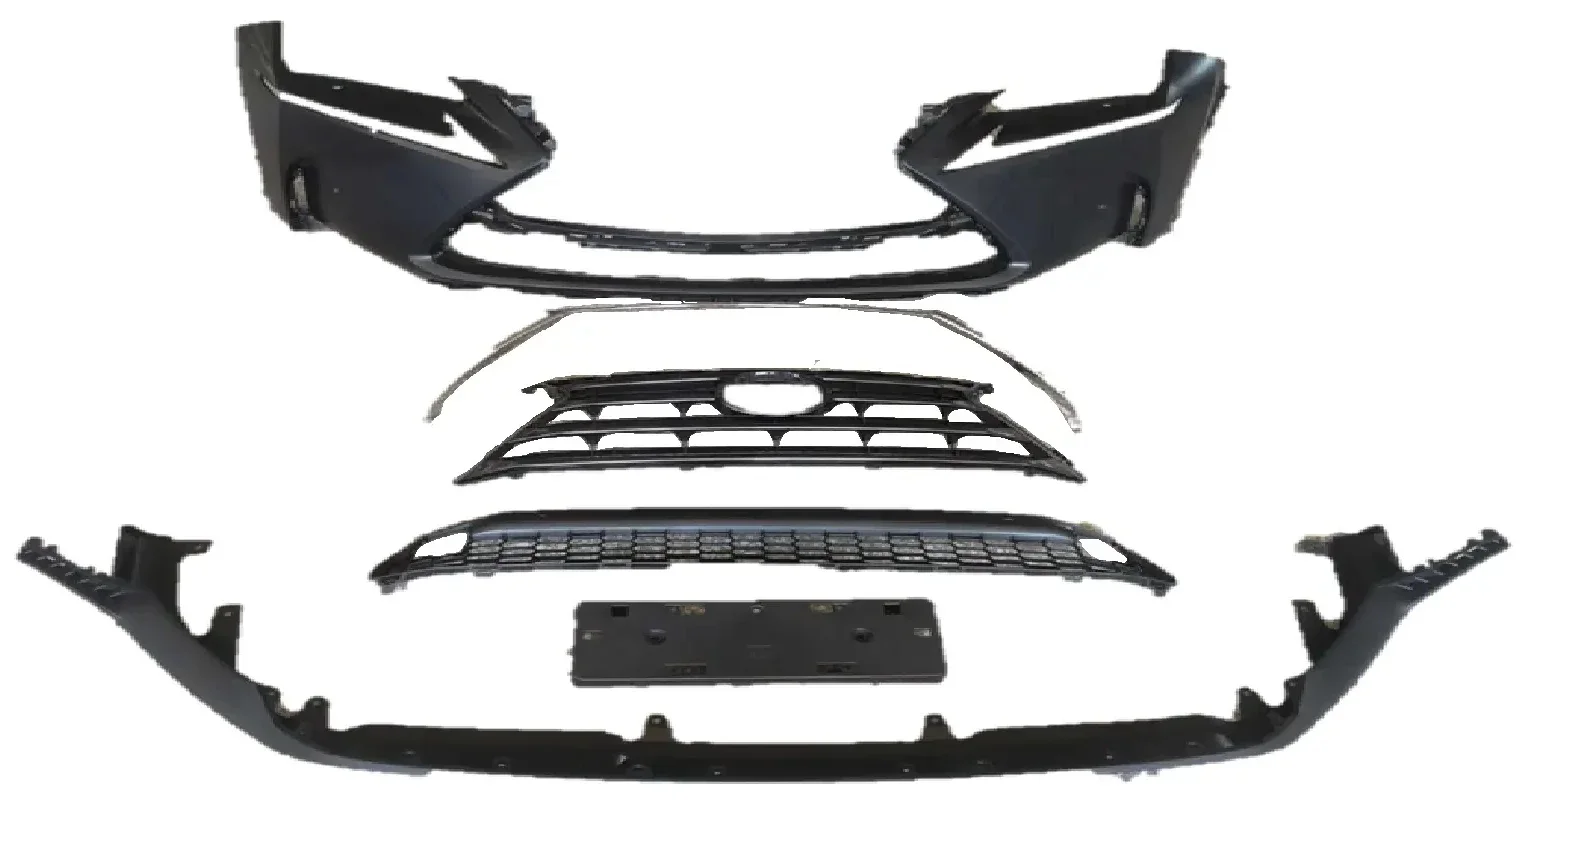 

Body Kit Front Bumper Grill Assembly for Lexus 2015-17 Modified 15 NX Style Kit Grille Fog Lamp Frames Car Accesorios